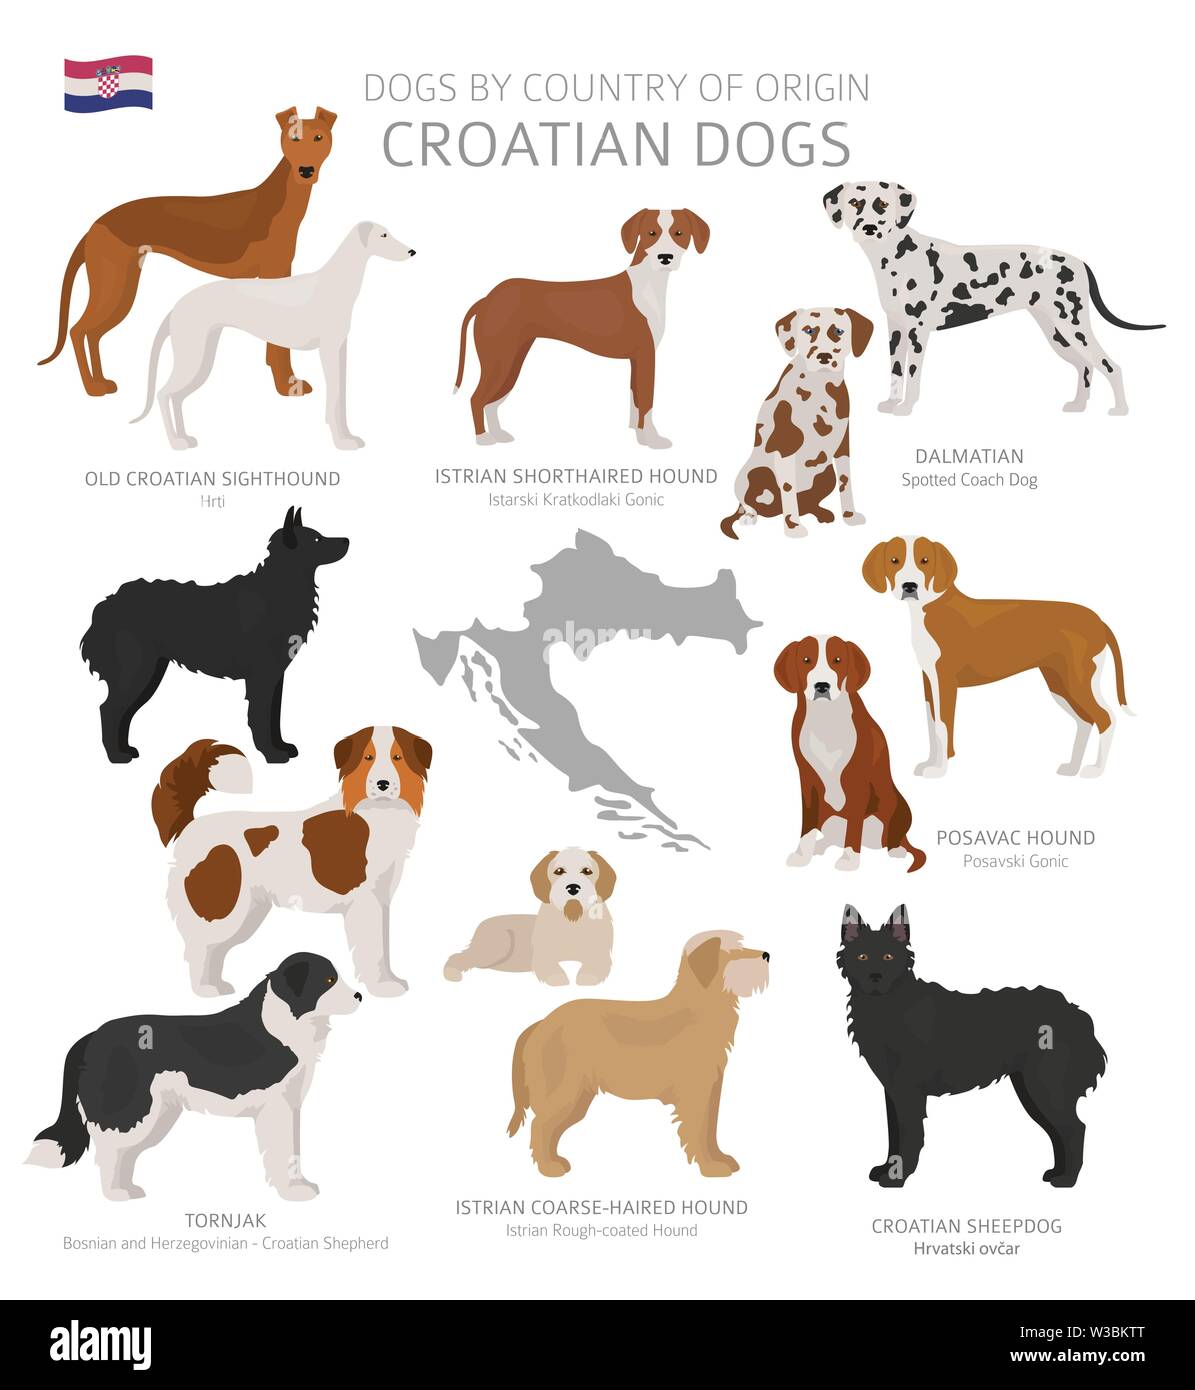 Dogs By Country Of Origin Croatian Dog Breeds Shepherds Hunting Herding Toy Working And Service Dogs Set Vector Illustration Stock Vector Image Art Alamy